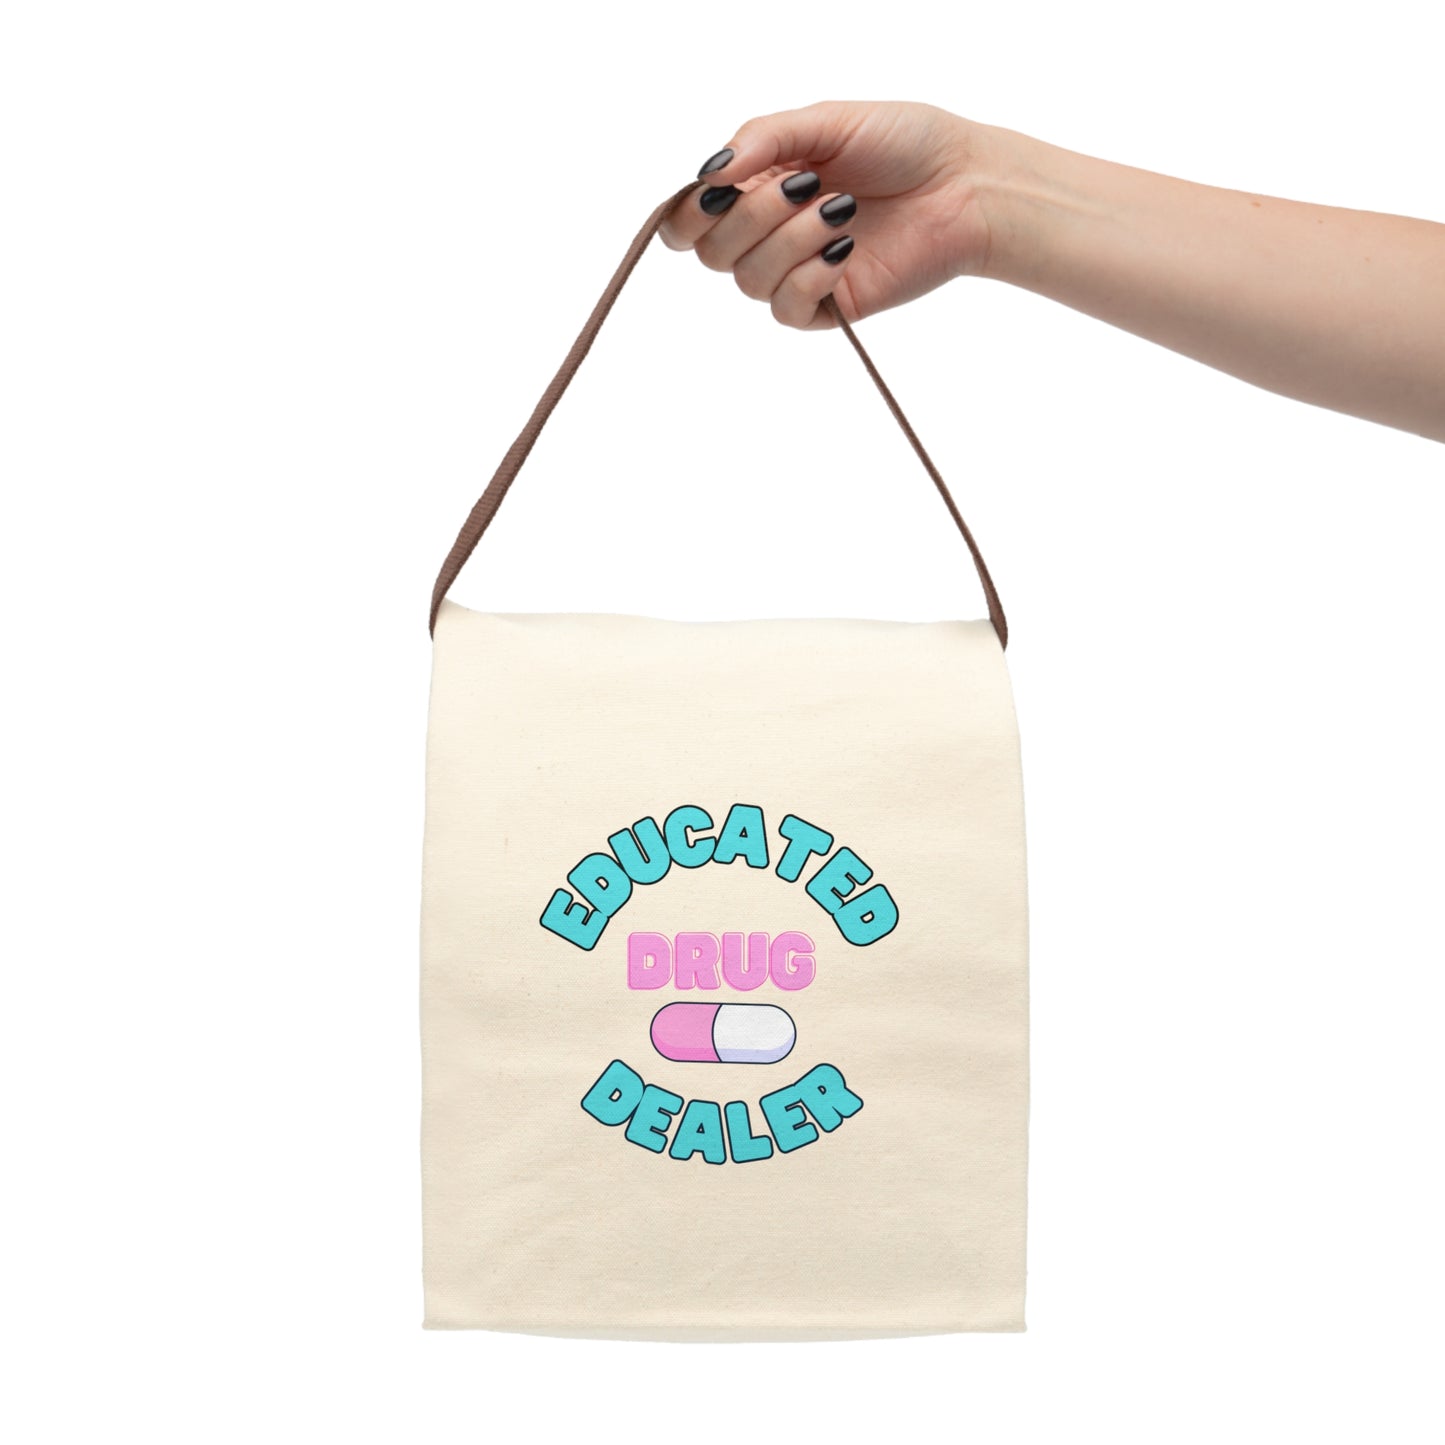 'Educated Drug Dealer' Canvas Lunch Bag With Strap